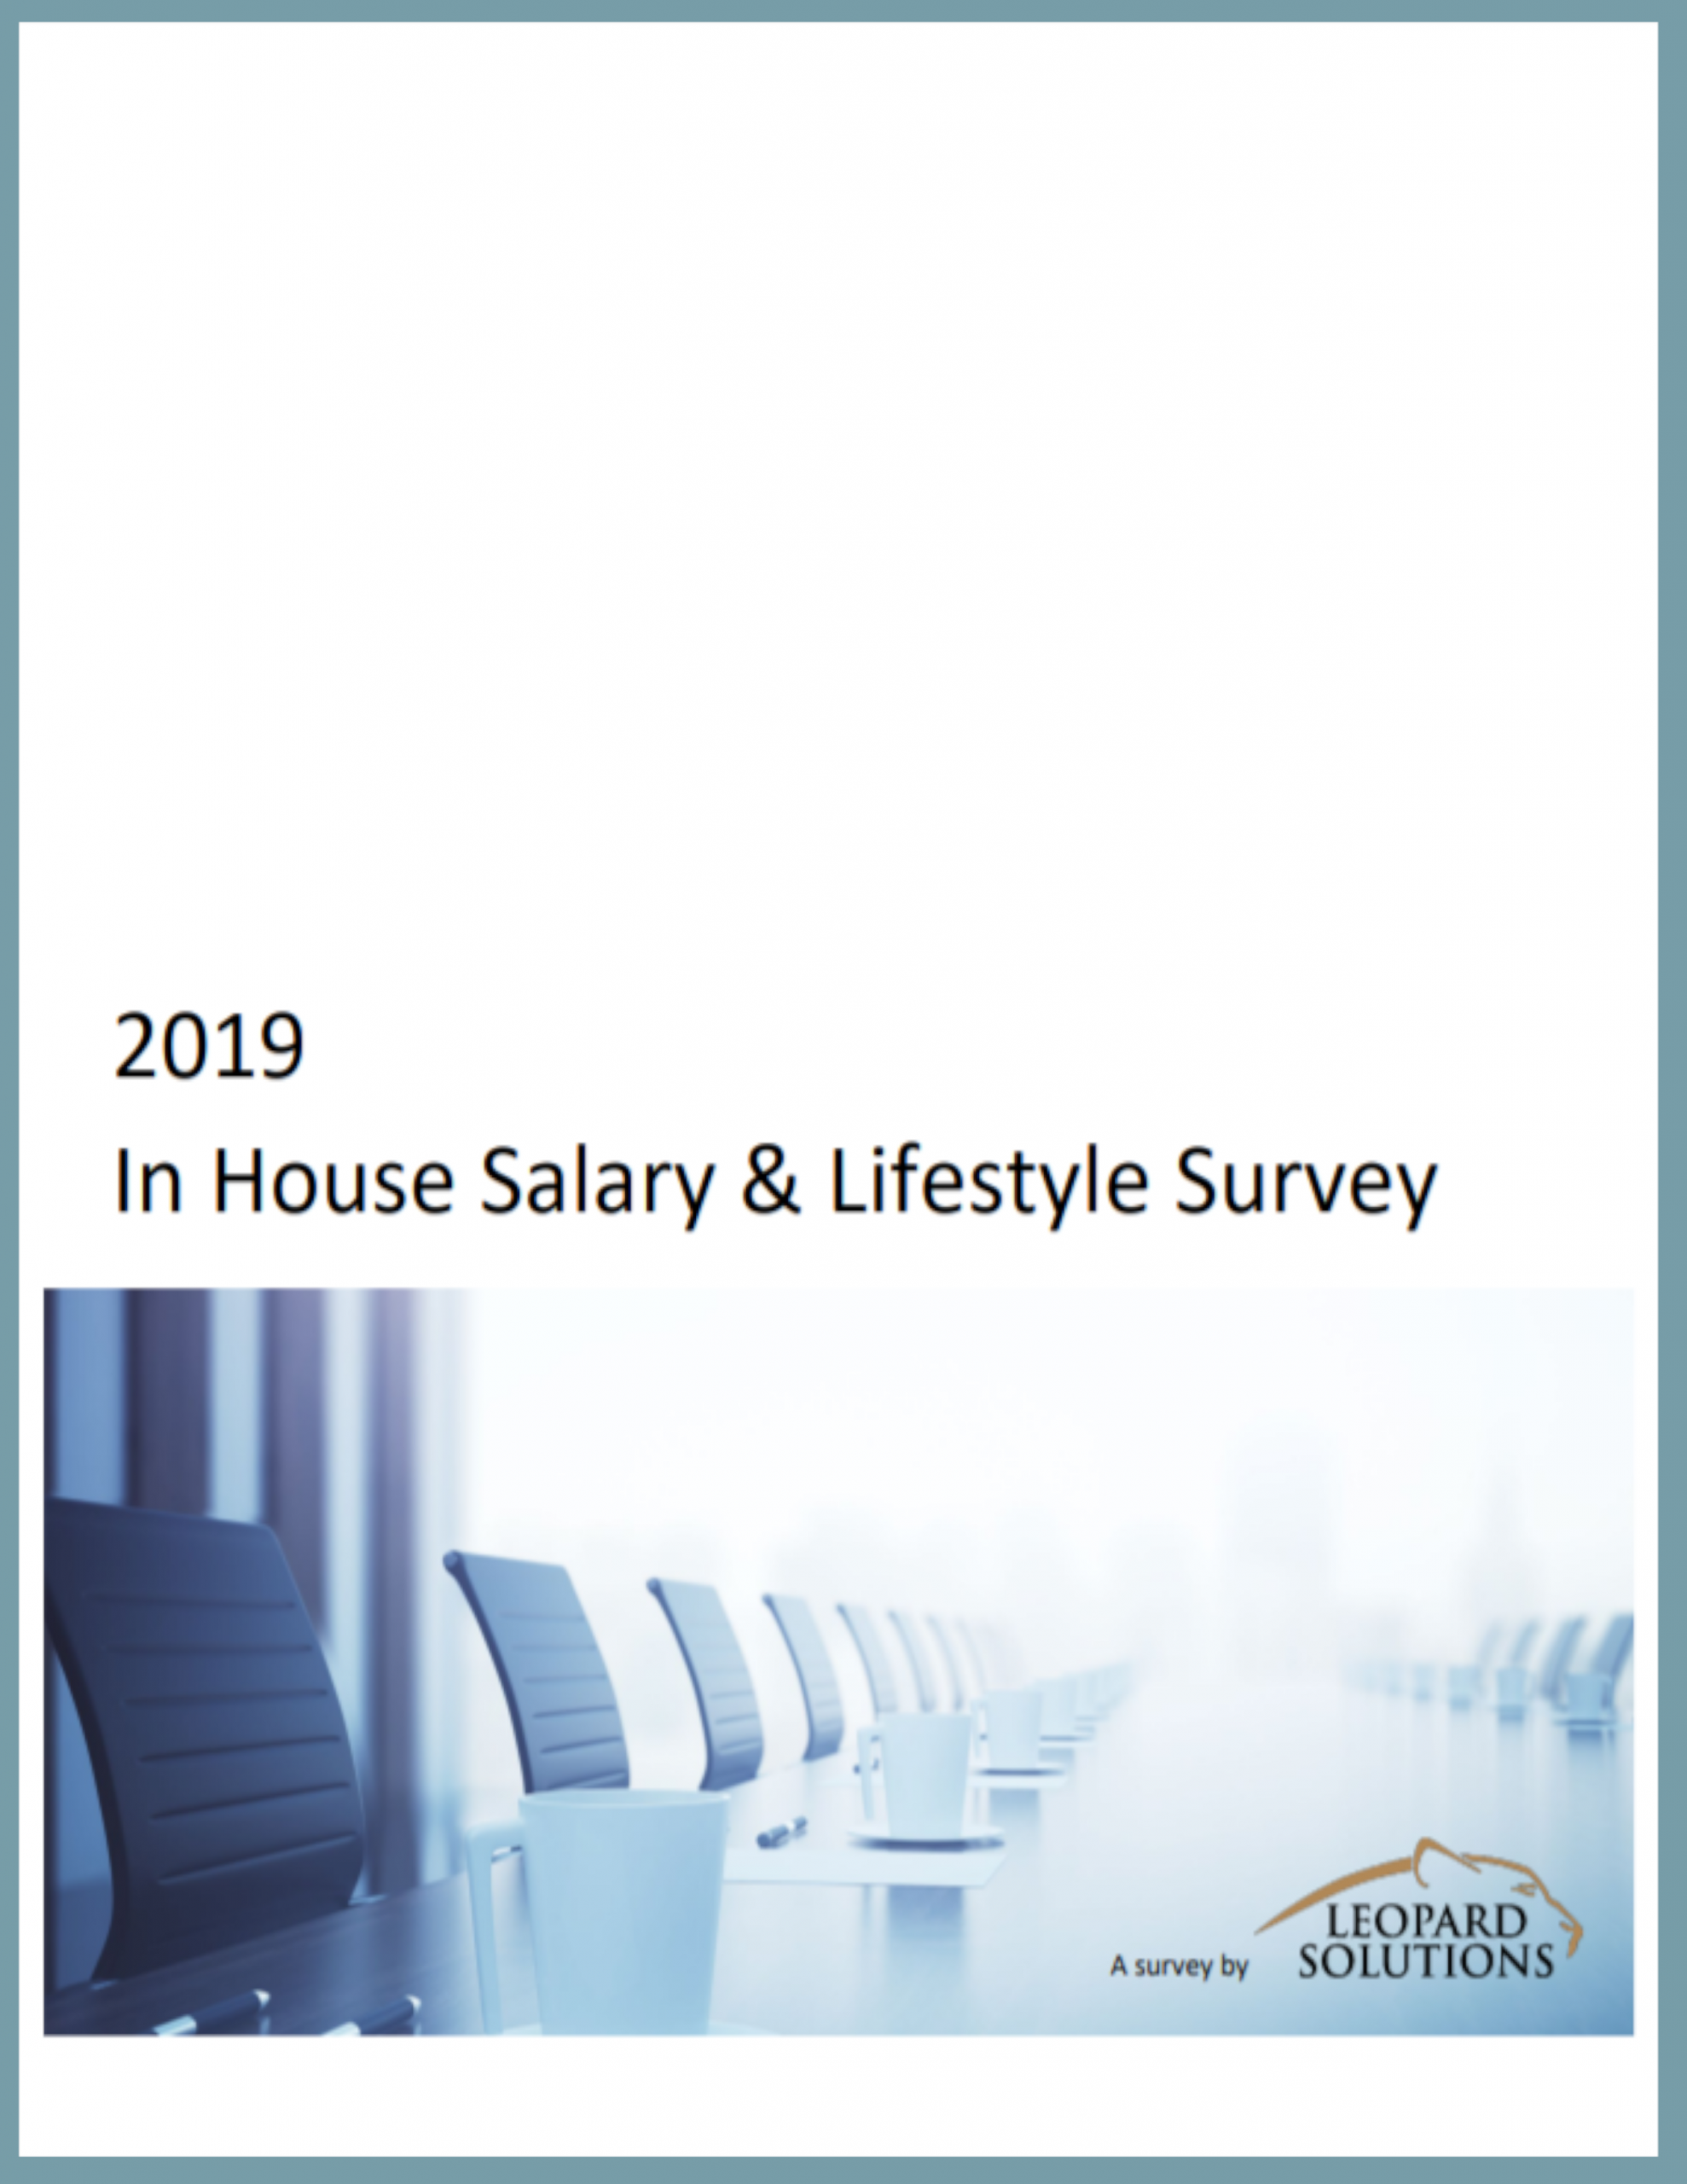 In house salary